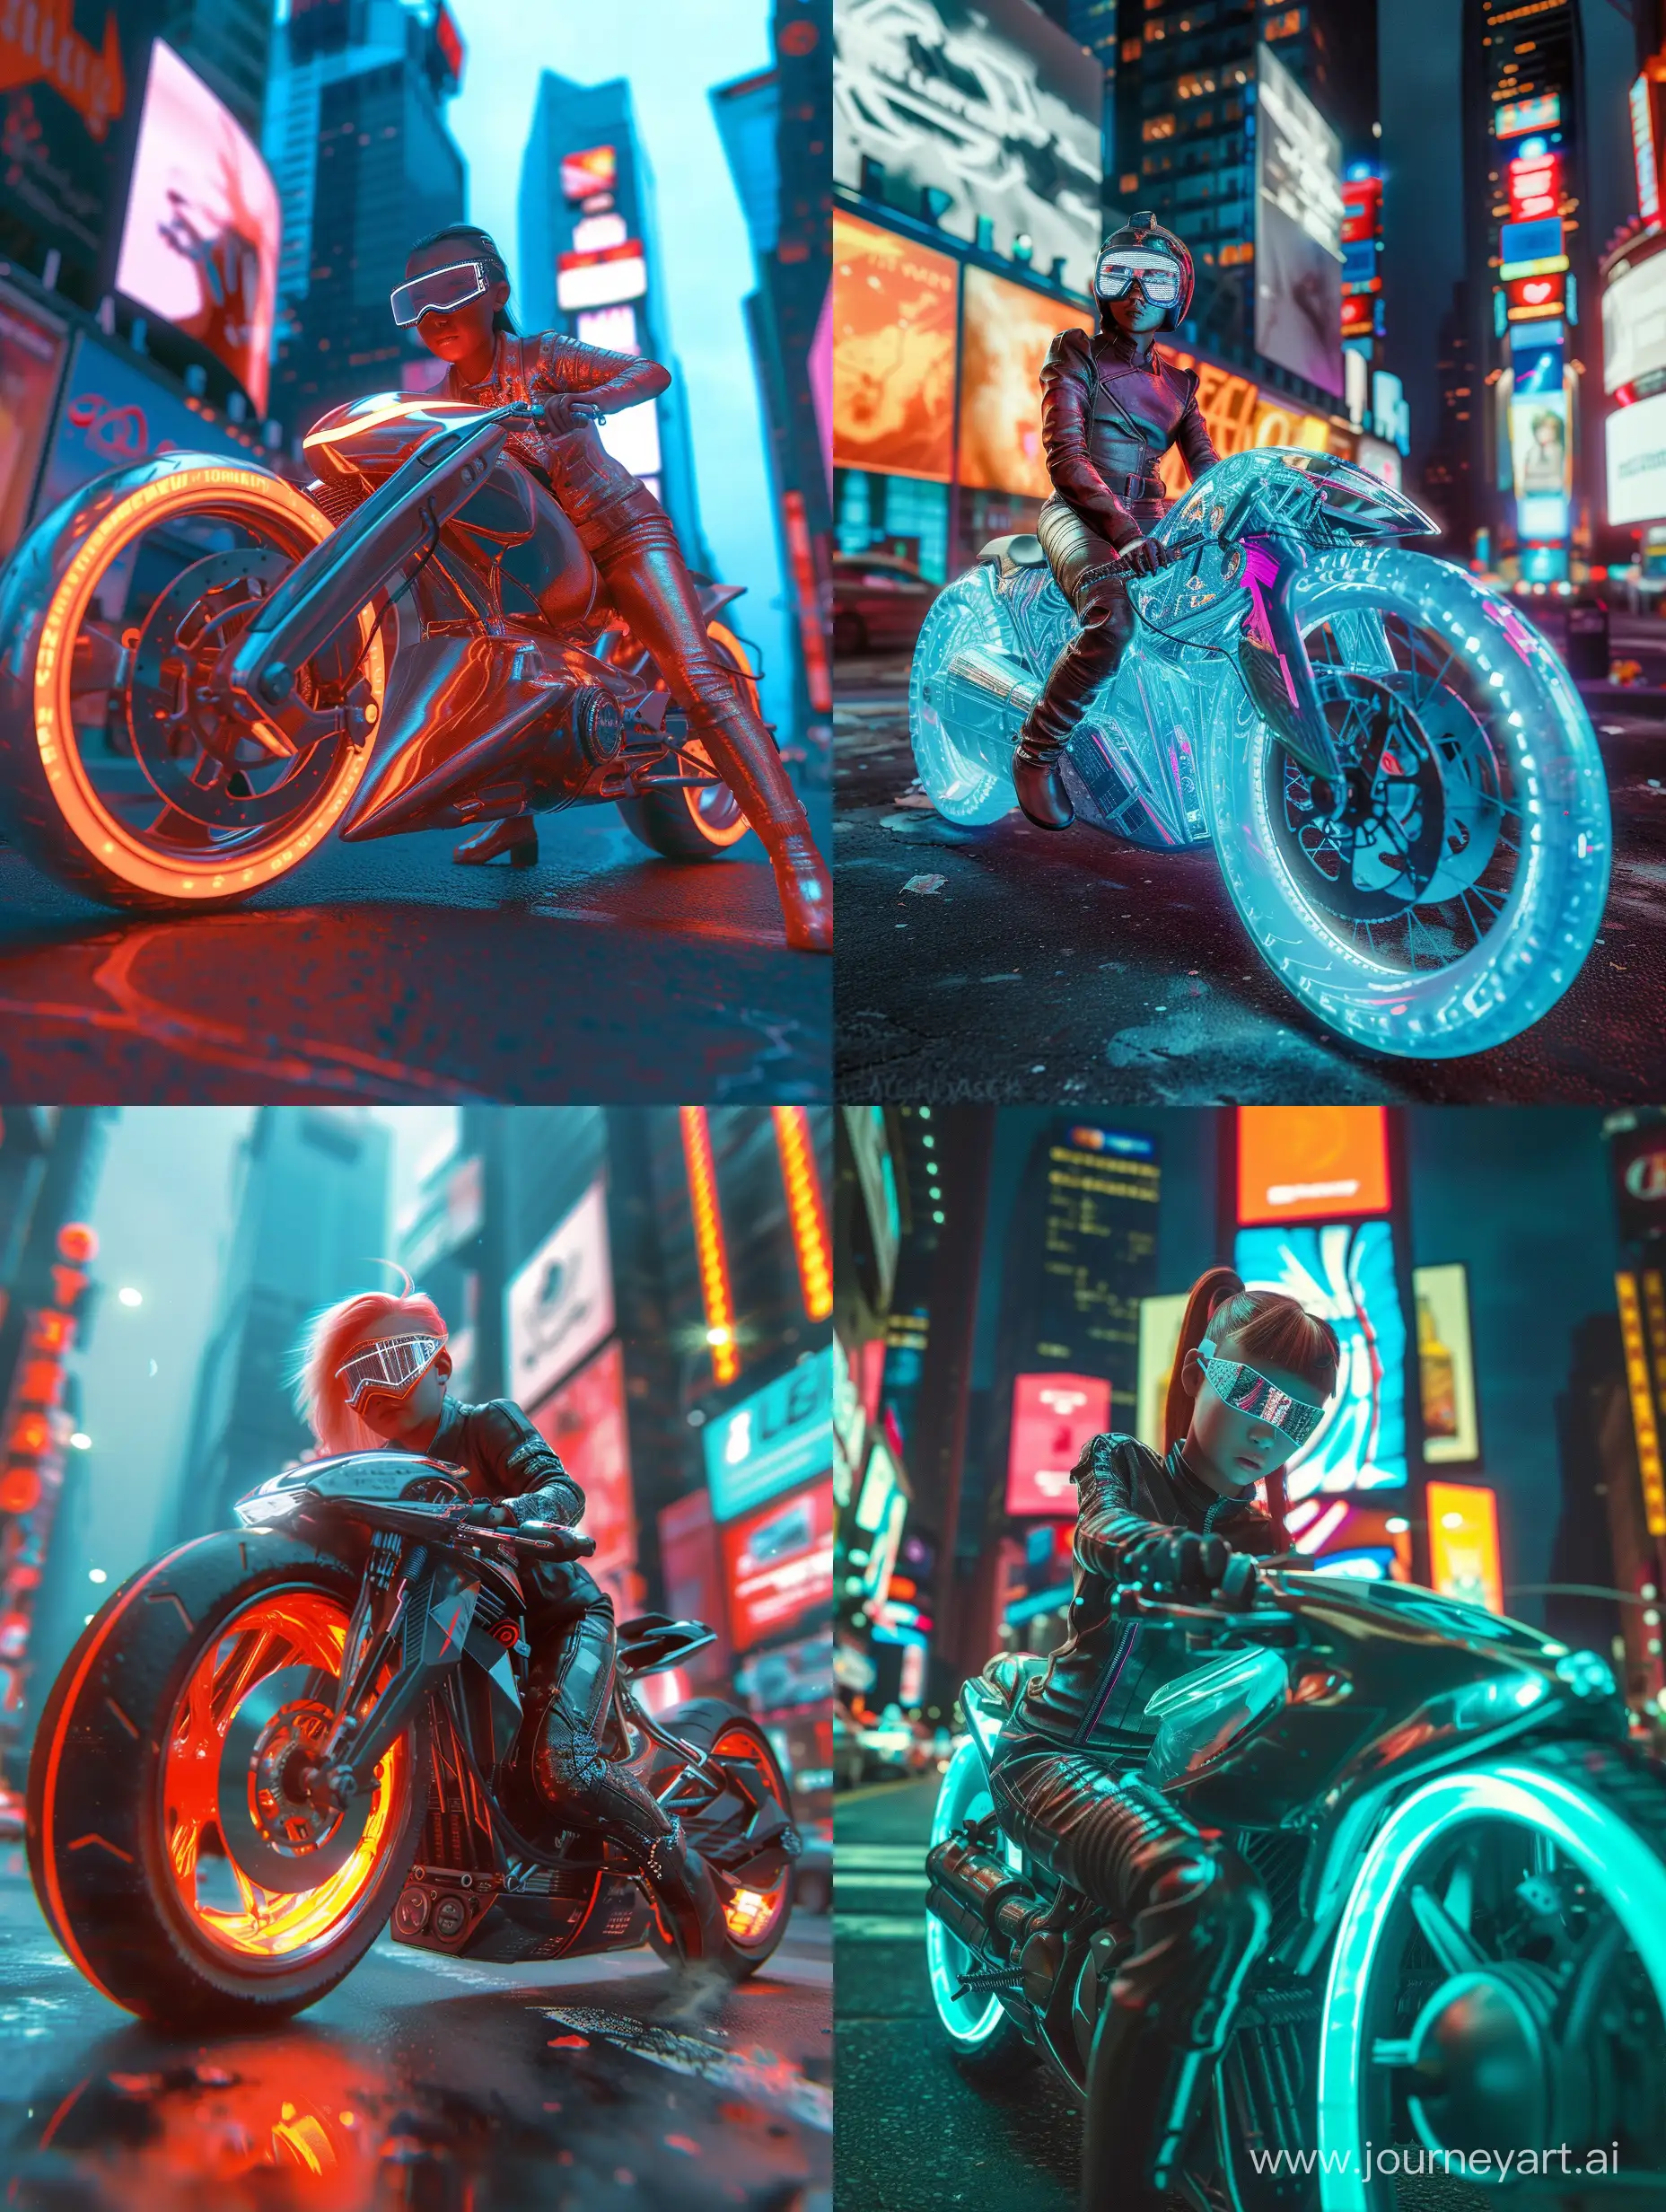 A high-definition photograph showcasing the cyberpunk subculture in all its vibrant glory. The central focus of the image is a young girl with a fiery personality, clad in a sleek leather outfit, straddling a powerful and futuristic motorcycle. The bike gleams under the neon lights of the city, while the girl confidently grips the handlebars, her eyes hidden behind reflective visor goggles. The composition highlights the urban environment, with towering skyscrapers and billboards casting an eerie glow. The image emanates a sense of excitement and edginess, with a shallow depth of field and a wide aperture lens that creates a captivating bokeh effect. (Style: Photography, Lens: Wide Aperture, ISO: N/A) --v 6.0